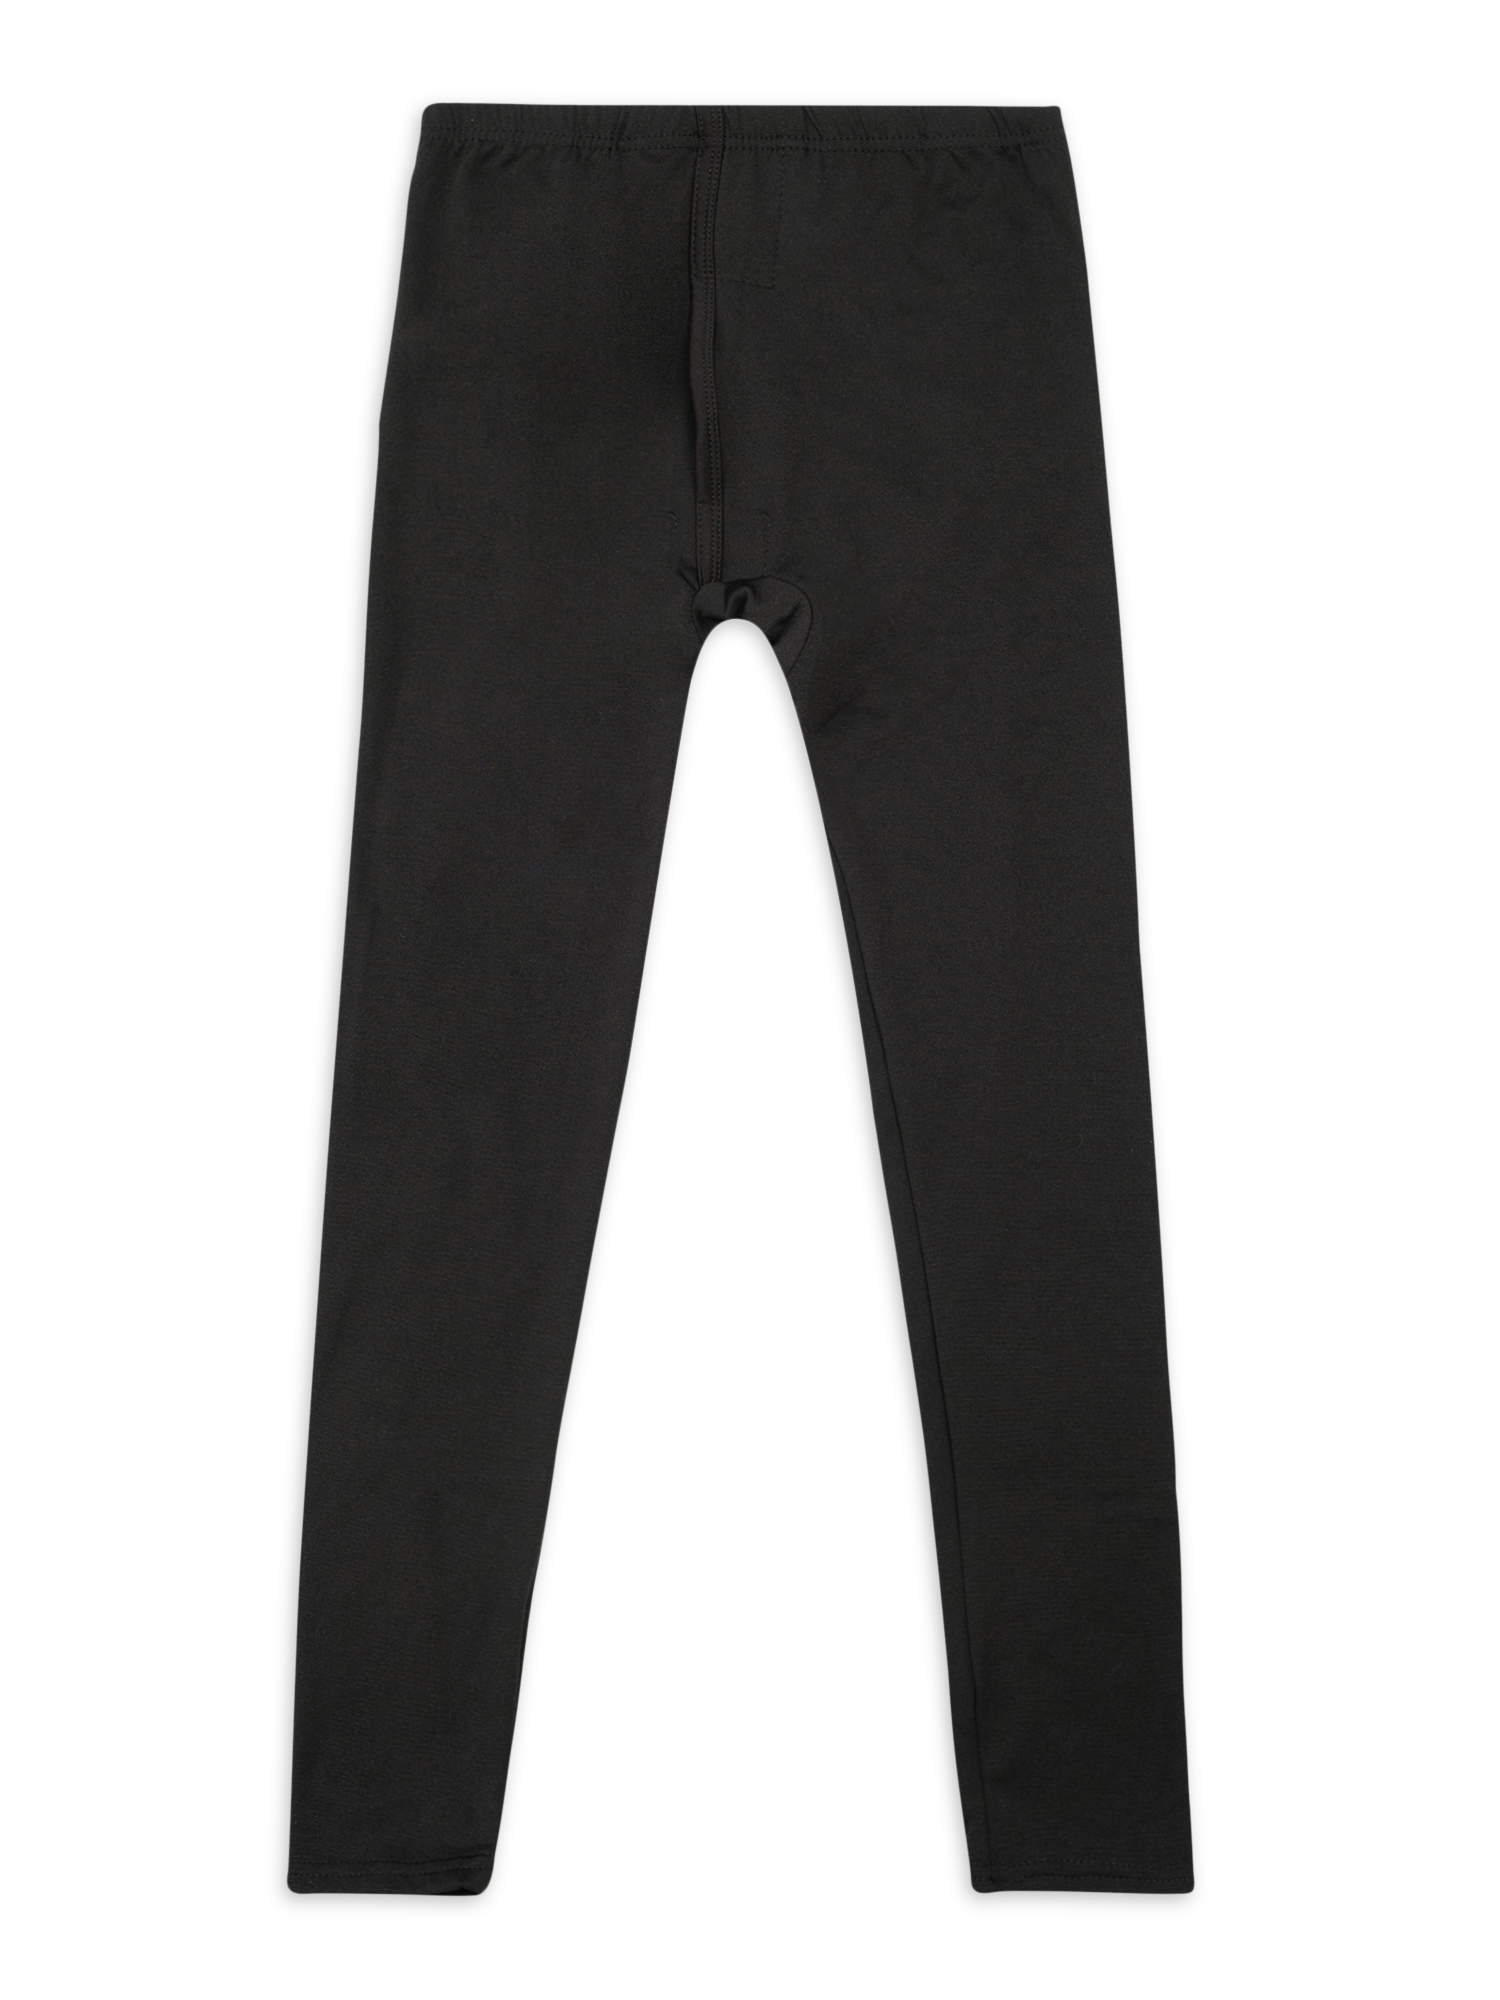 Real Essentials Boys Thermal Bottoms, 3 Pack Fleece Lined Thermal Pants Sizes S (6-7) - XL (16-18) - image 2 of 5